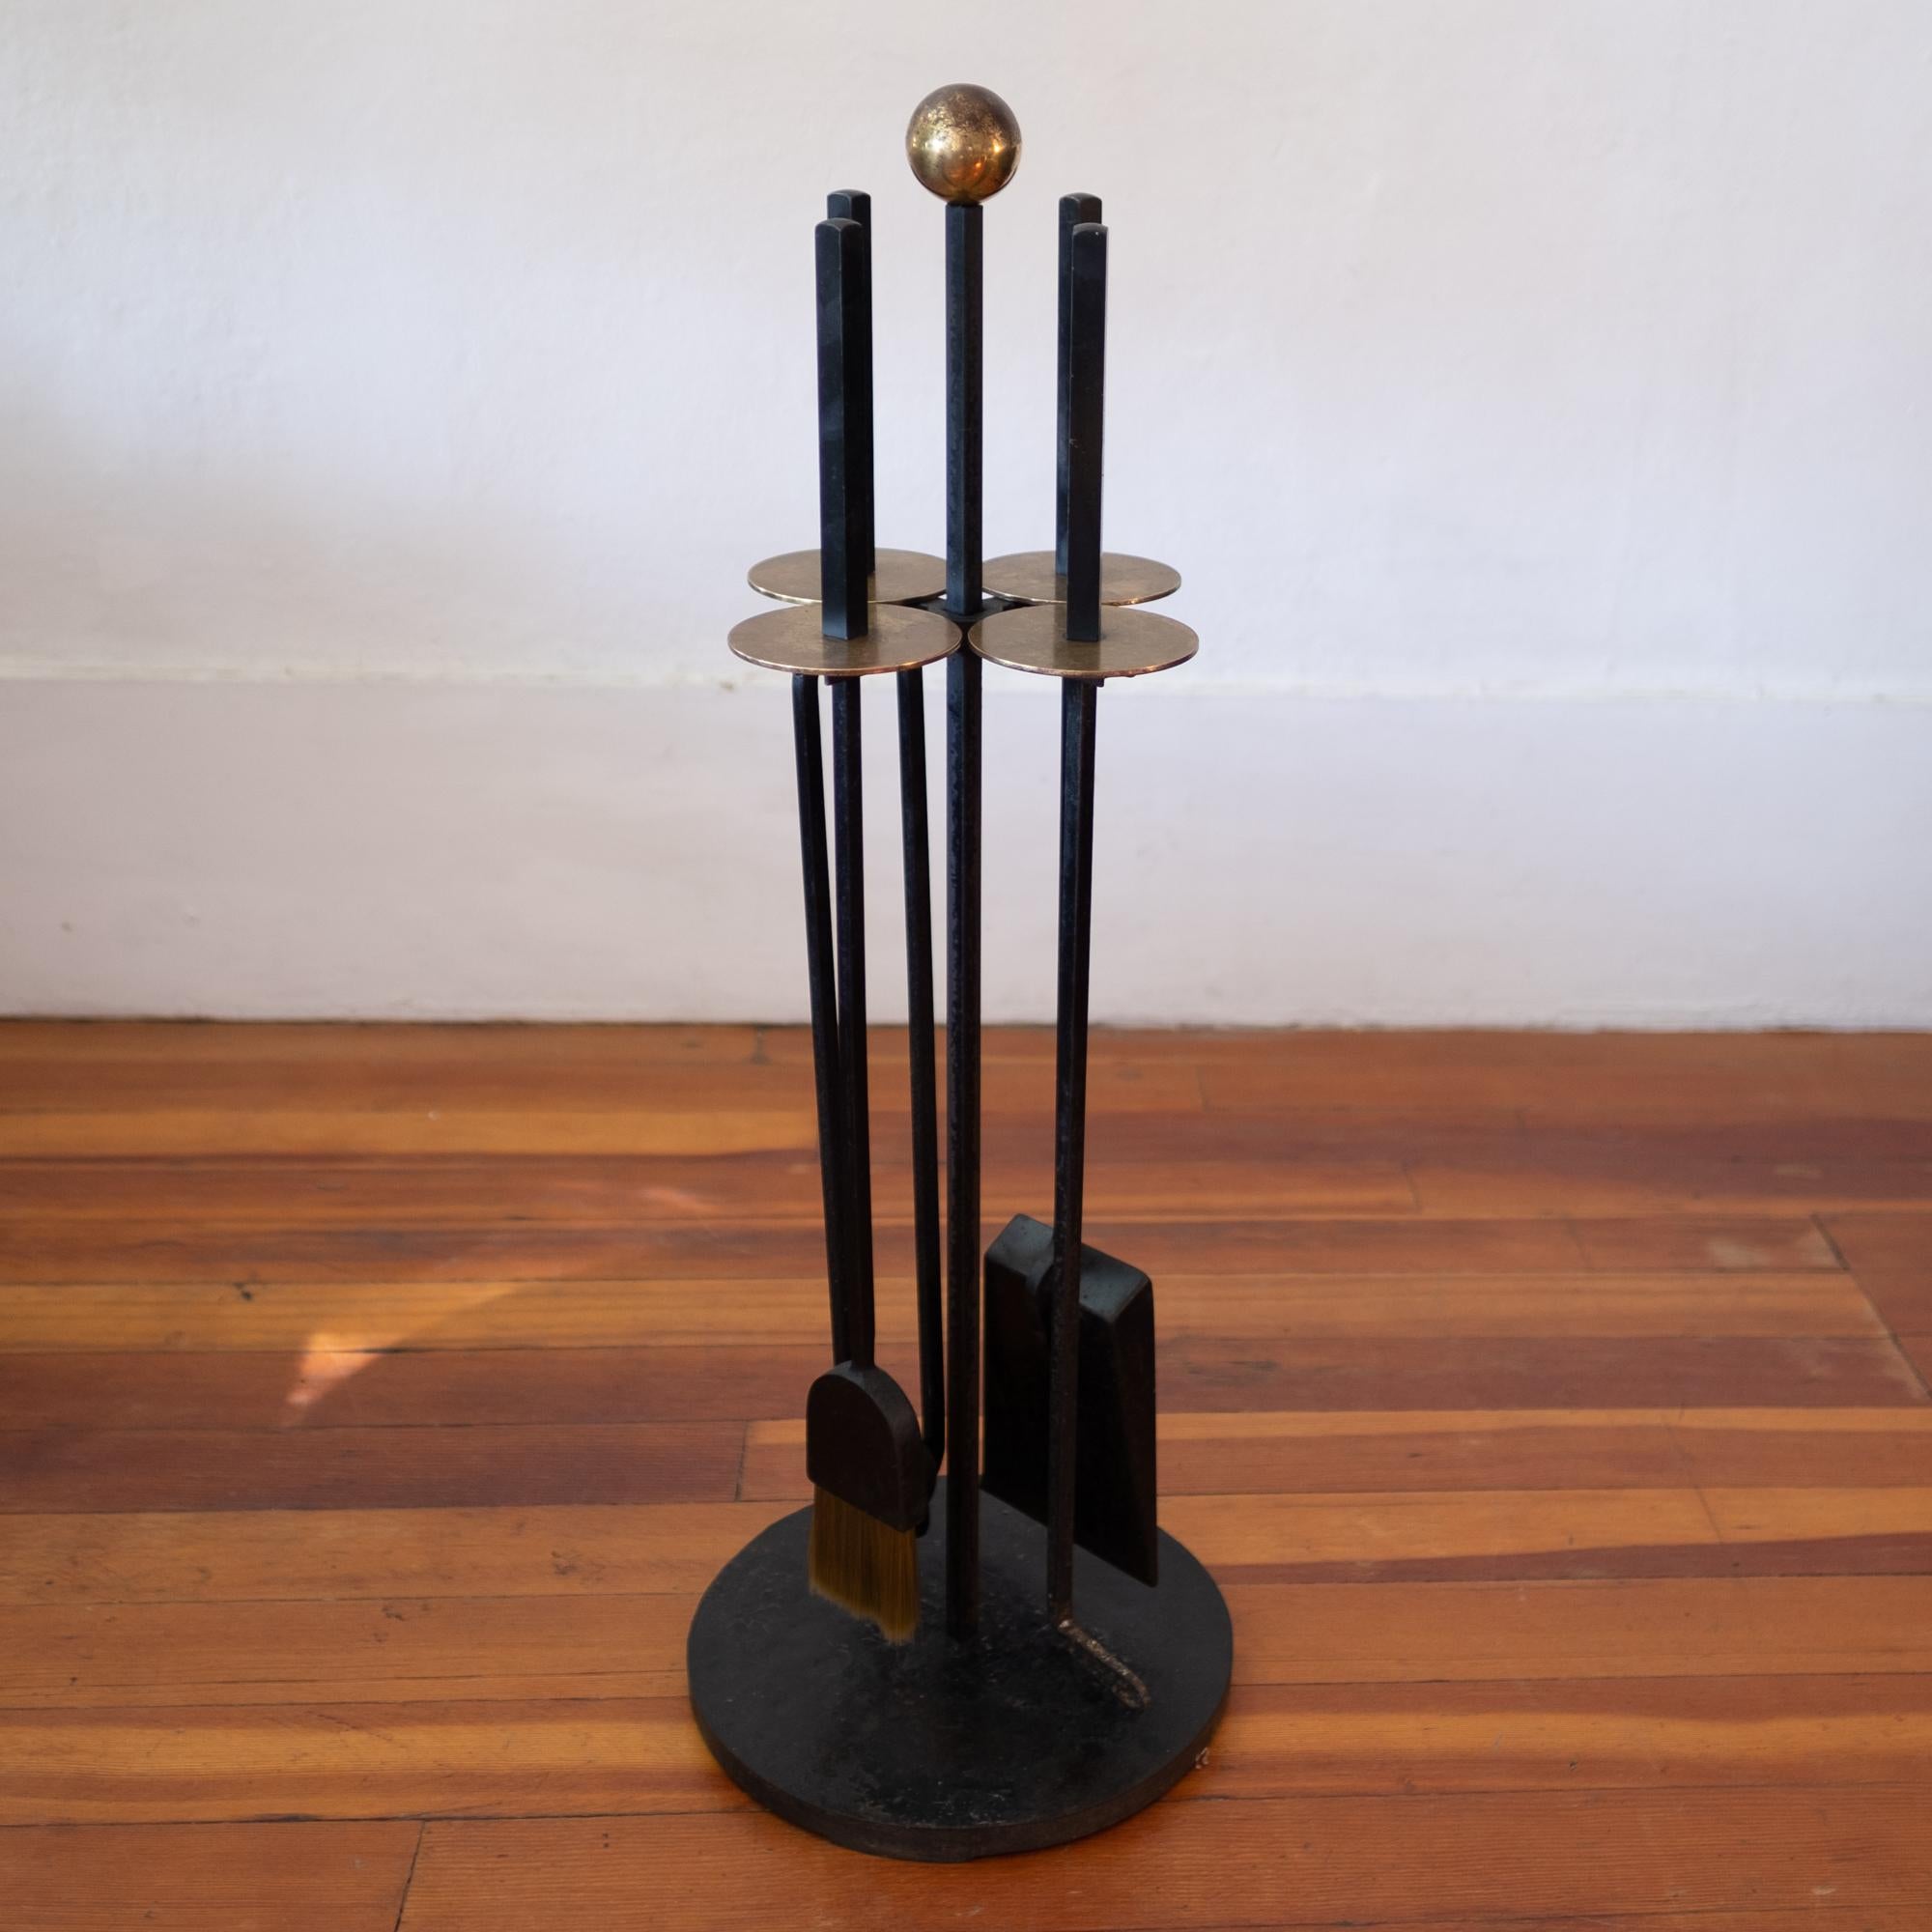 A set of modernist solid iron fireplace tools with solid brass discs and ball. The set includes a shovel, broom, poker and log grabber. High quality and substantial construction with the original finish. 1950s

The set was designed by California